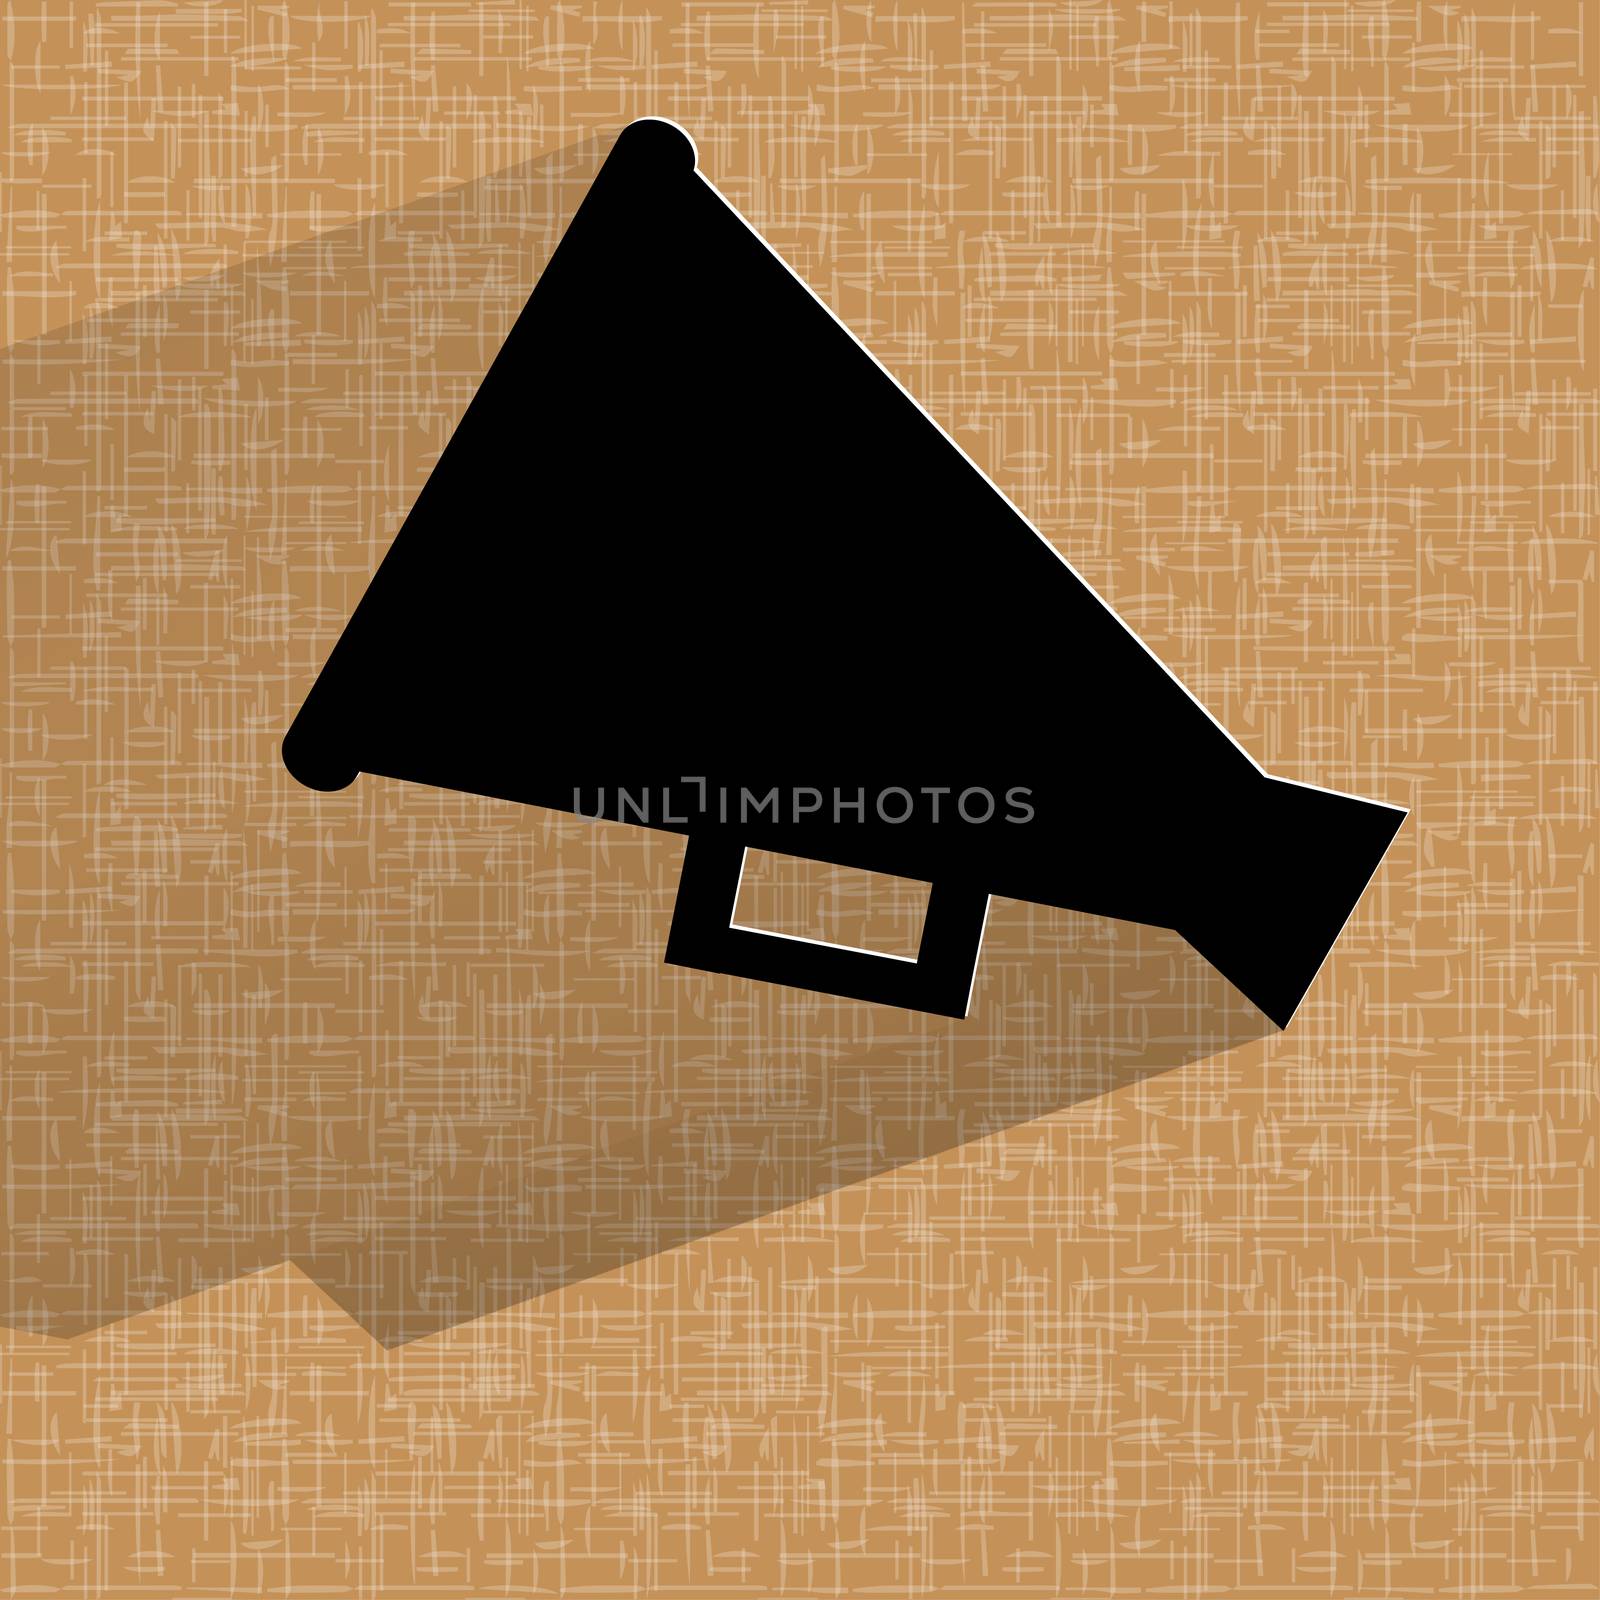 Megaphone, Loud-hailer icon. on a flat geometric abstract background  . 